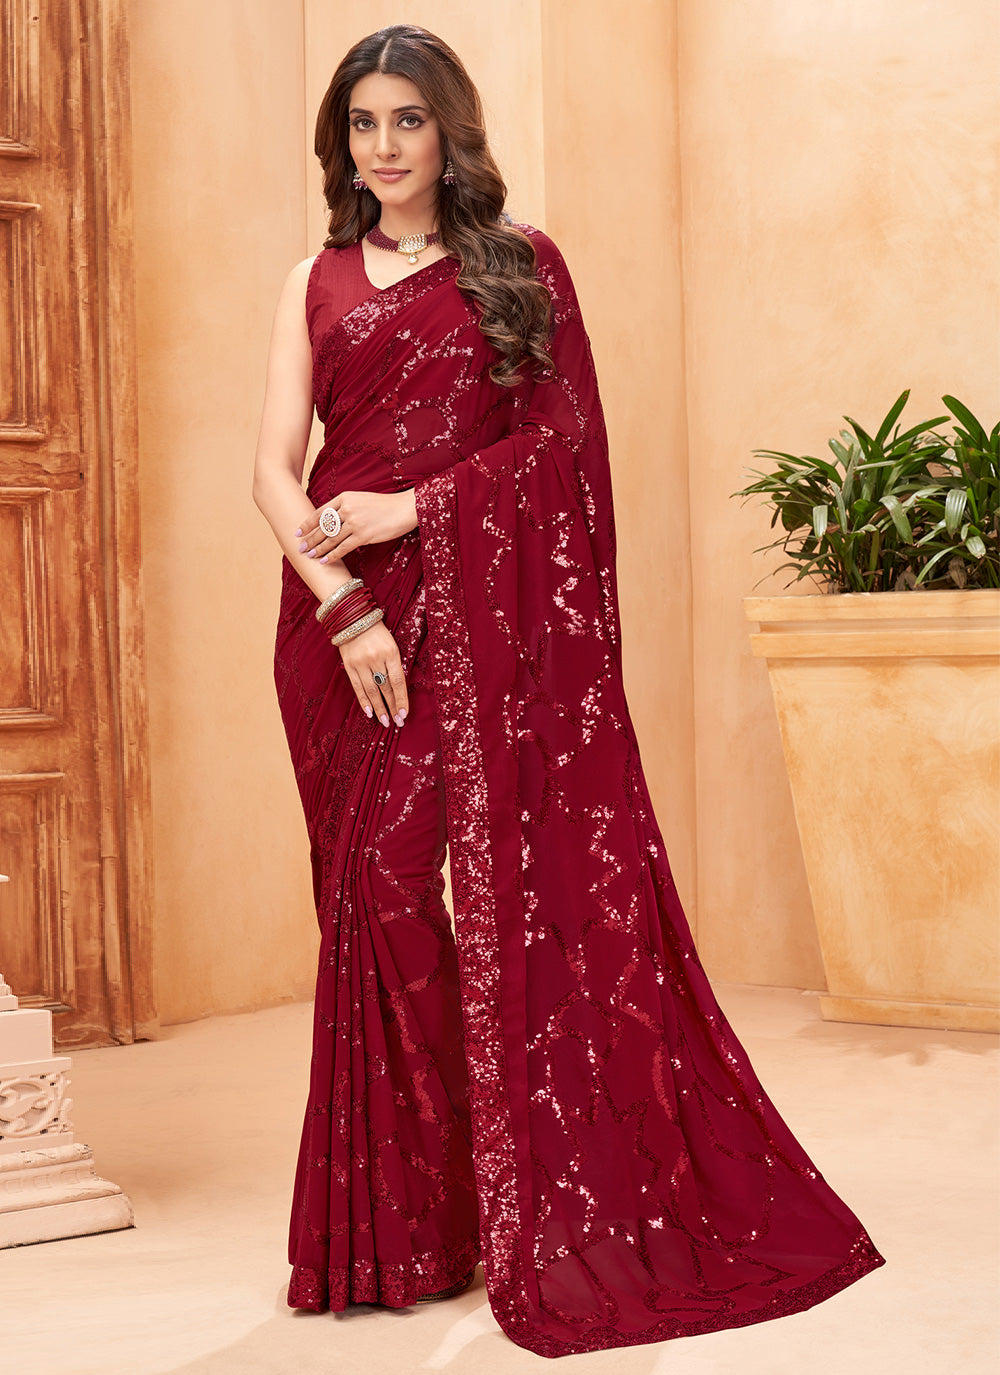 Faux Georgette Saree in Maroon